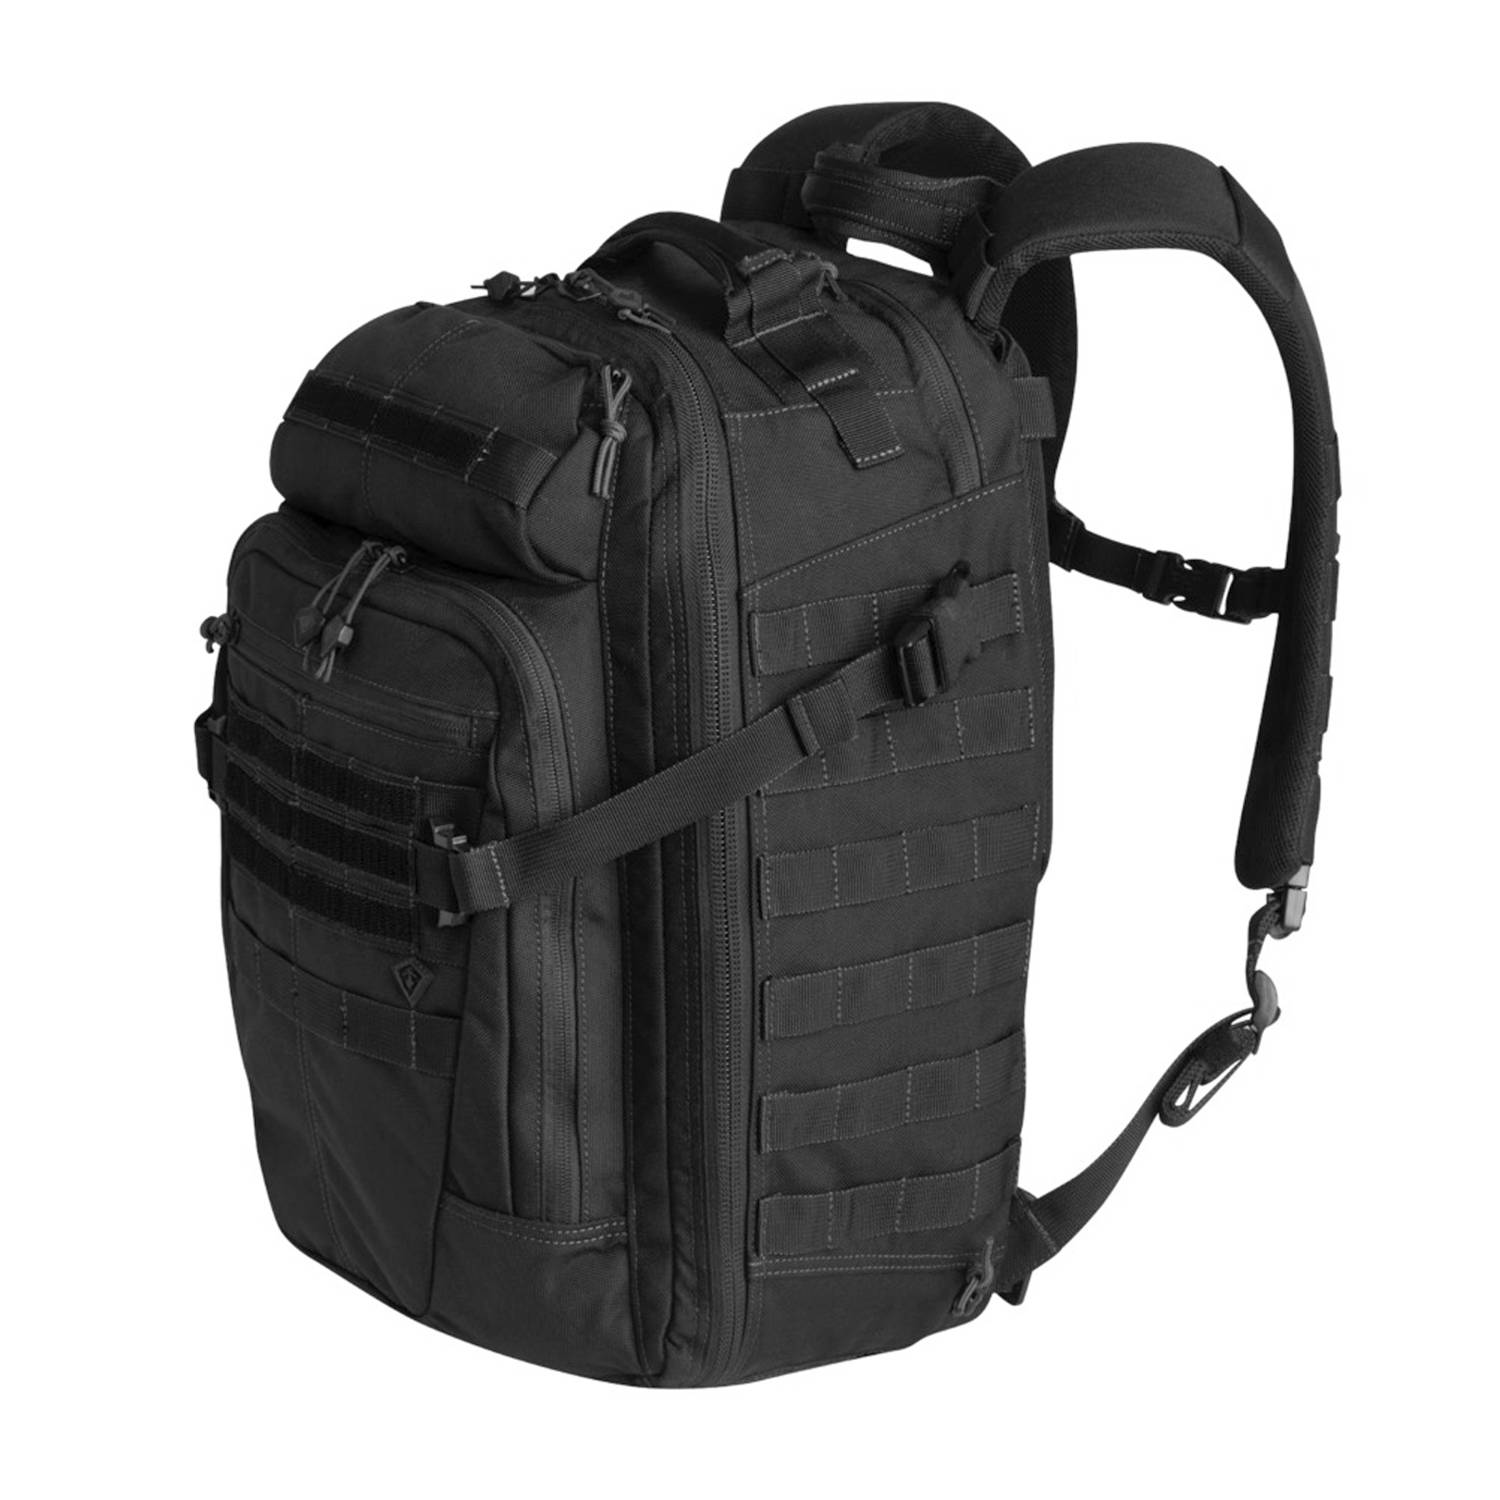 FIRST TACTICAL SPECIALIST 1-DAY BACKPACK - 36L